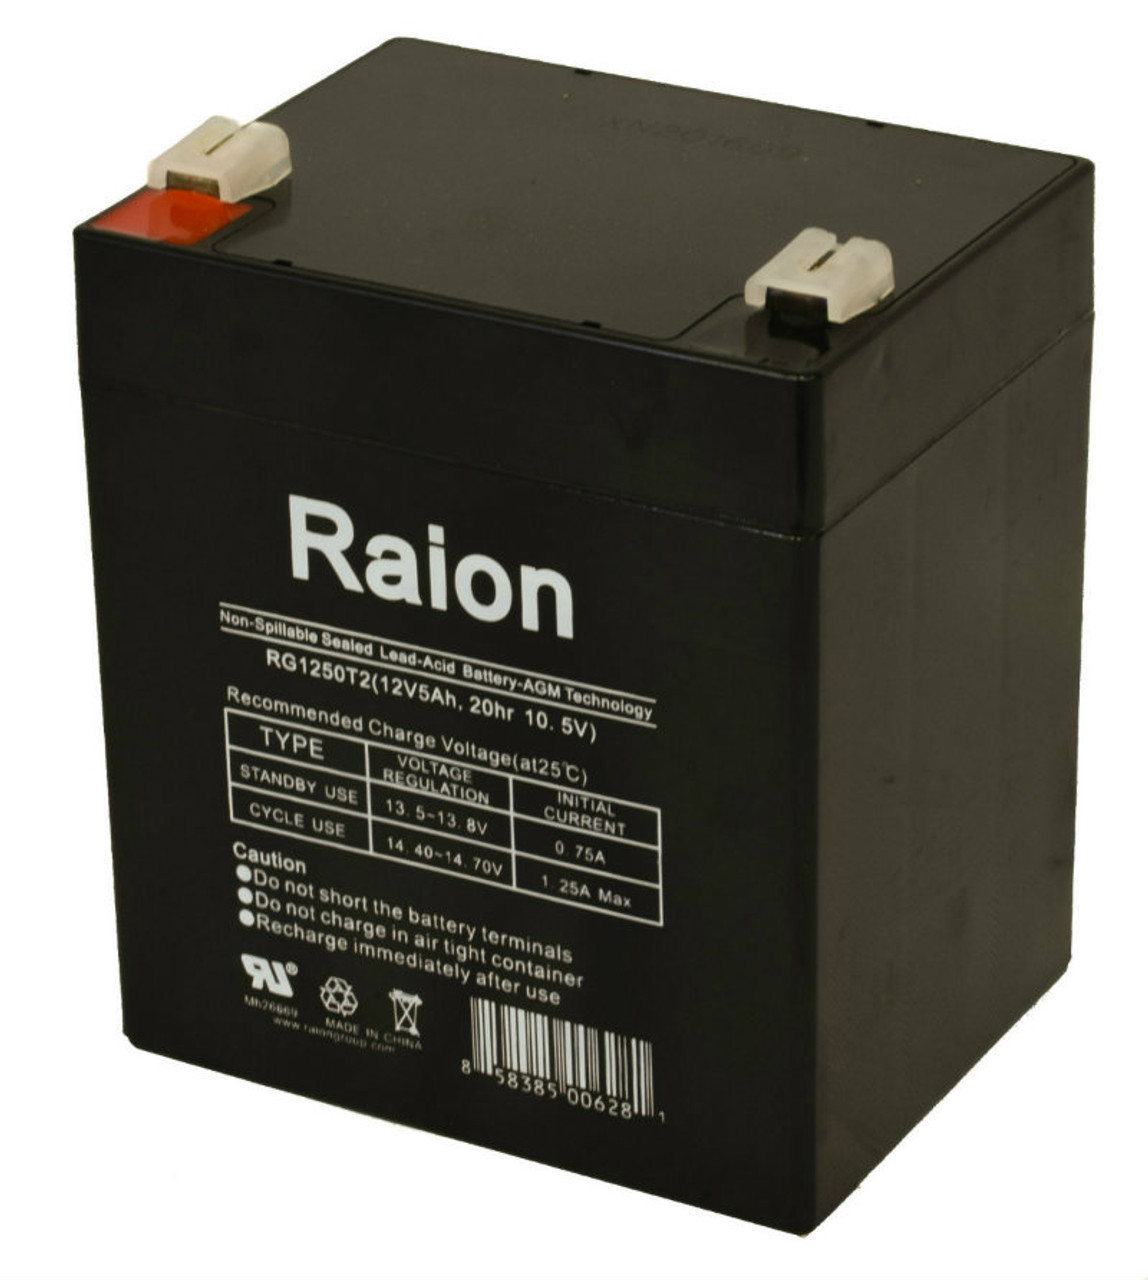 Raion Power RG1250T1 Replacement Alarm Security System Battery for Ademco Vista 15P